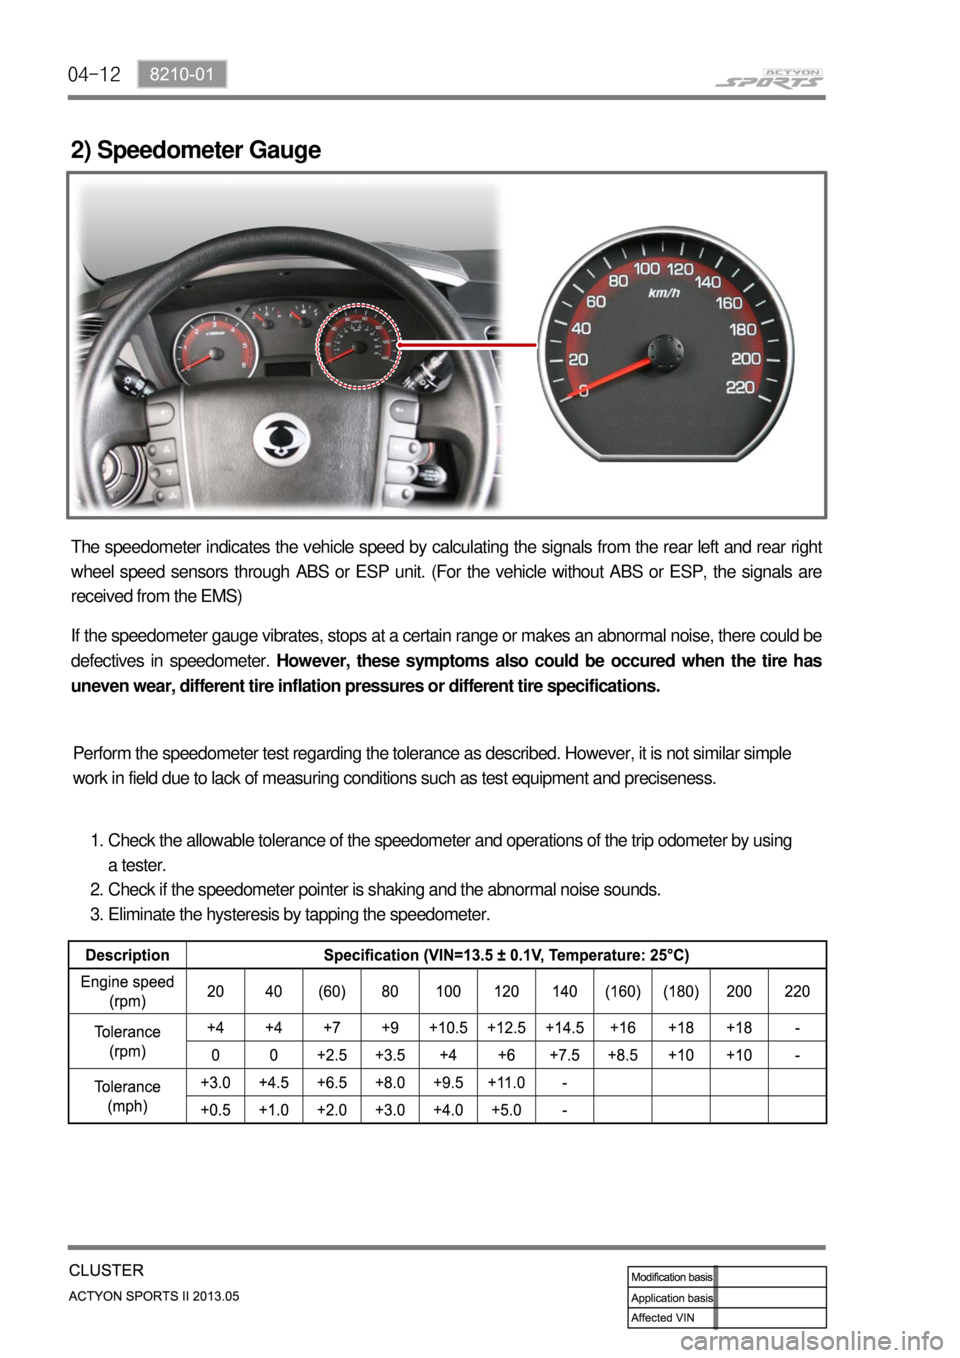 SSANGYONG NEW ACTYON SPORTS 2013  Service Manual 04-12
2) Speedometer Gauge
The speedometer indicates the vehicle speed by calculating the signals from the rear left and rear right 
wheel speed sensors through ABS or ESP unit. (For the vehicle witho